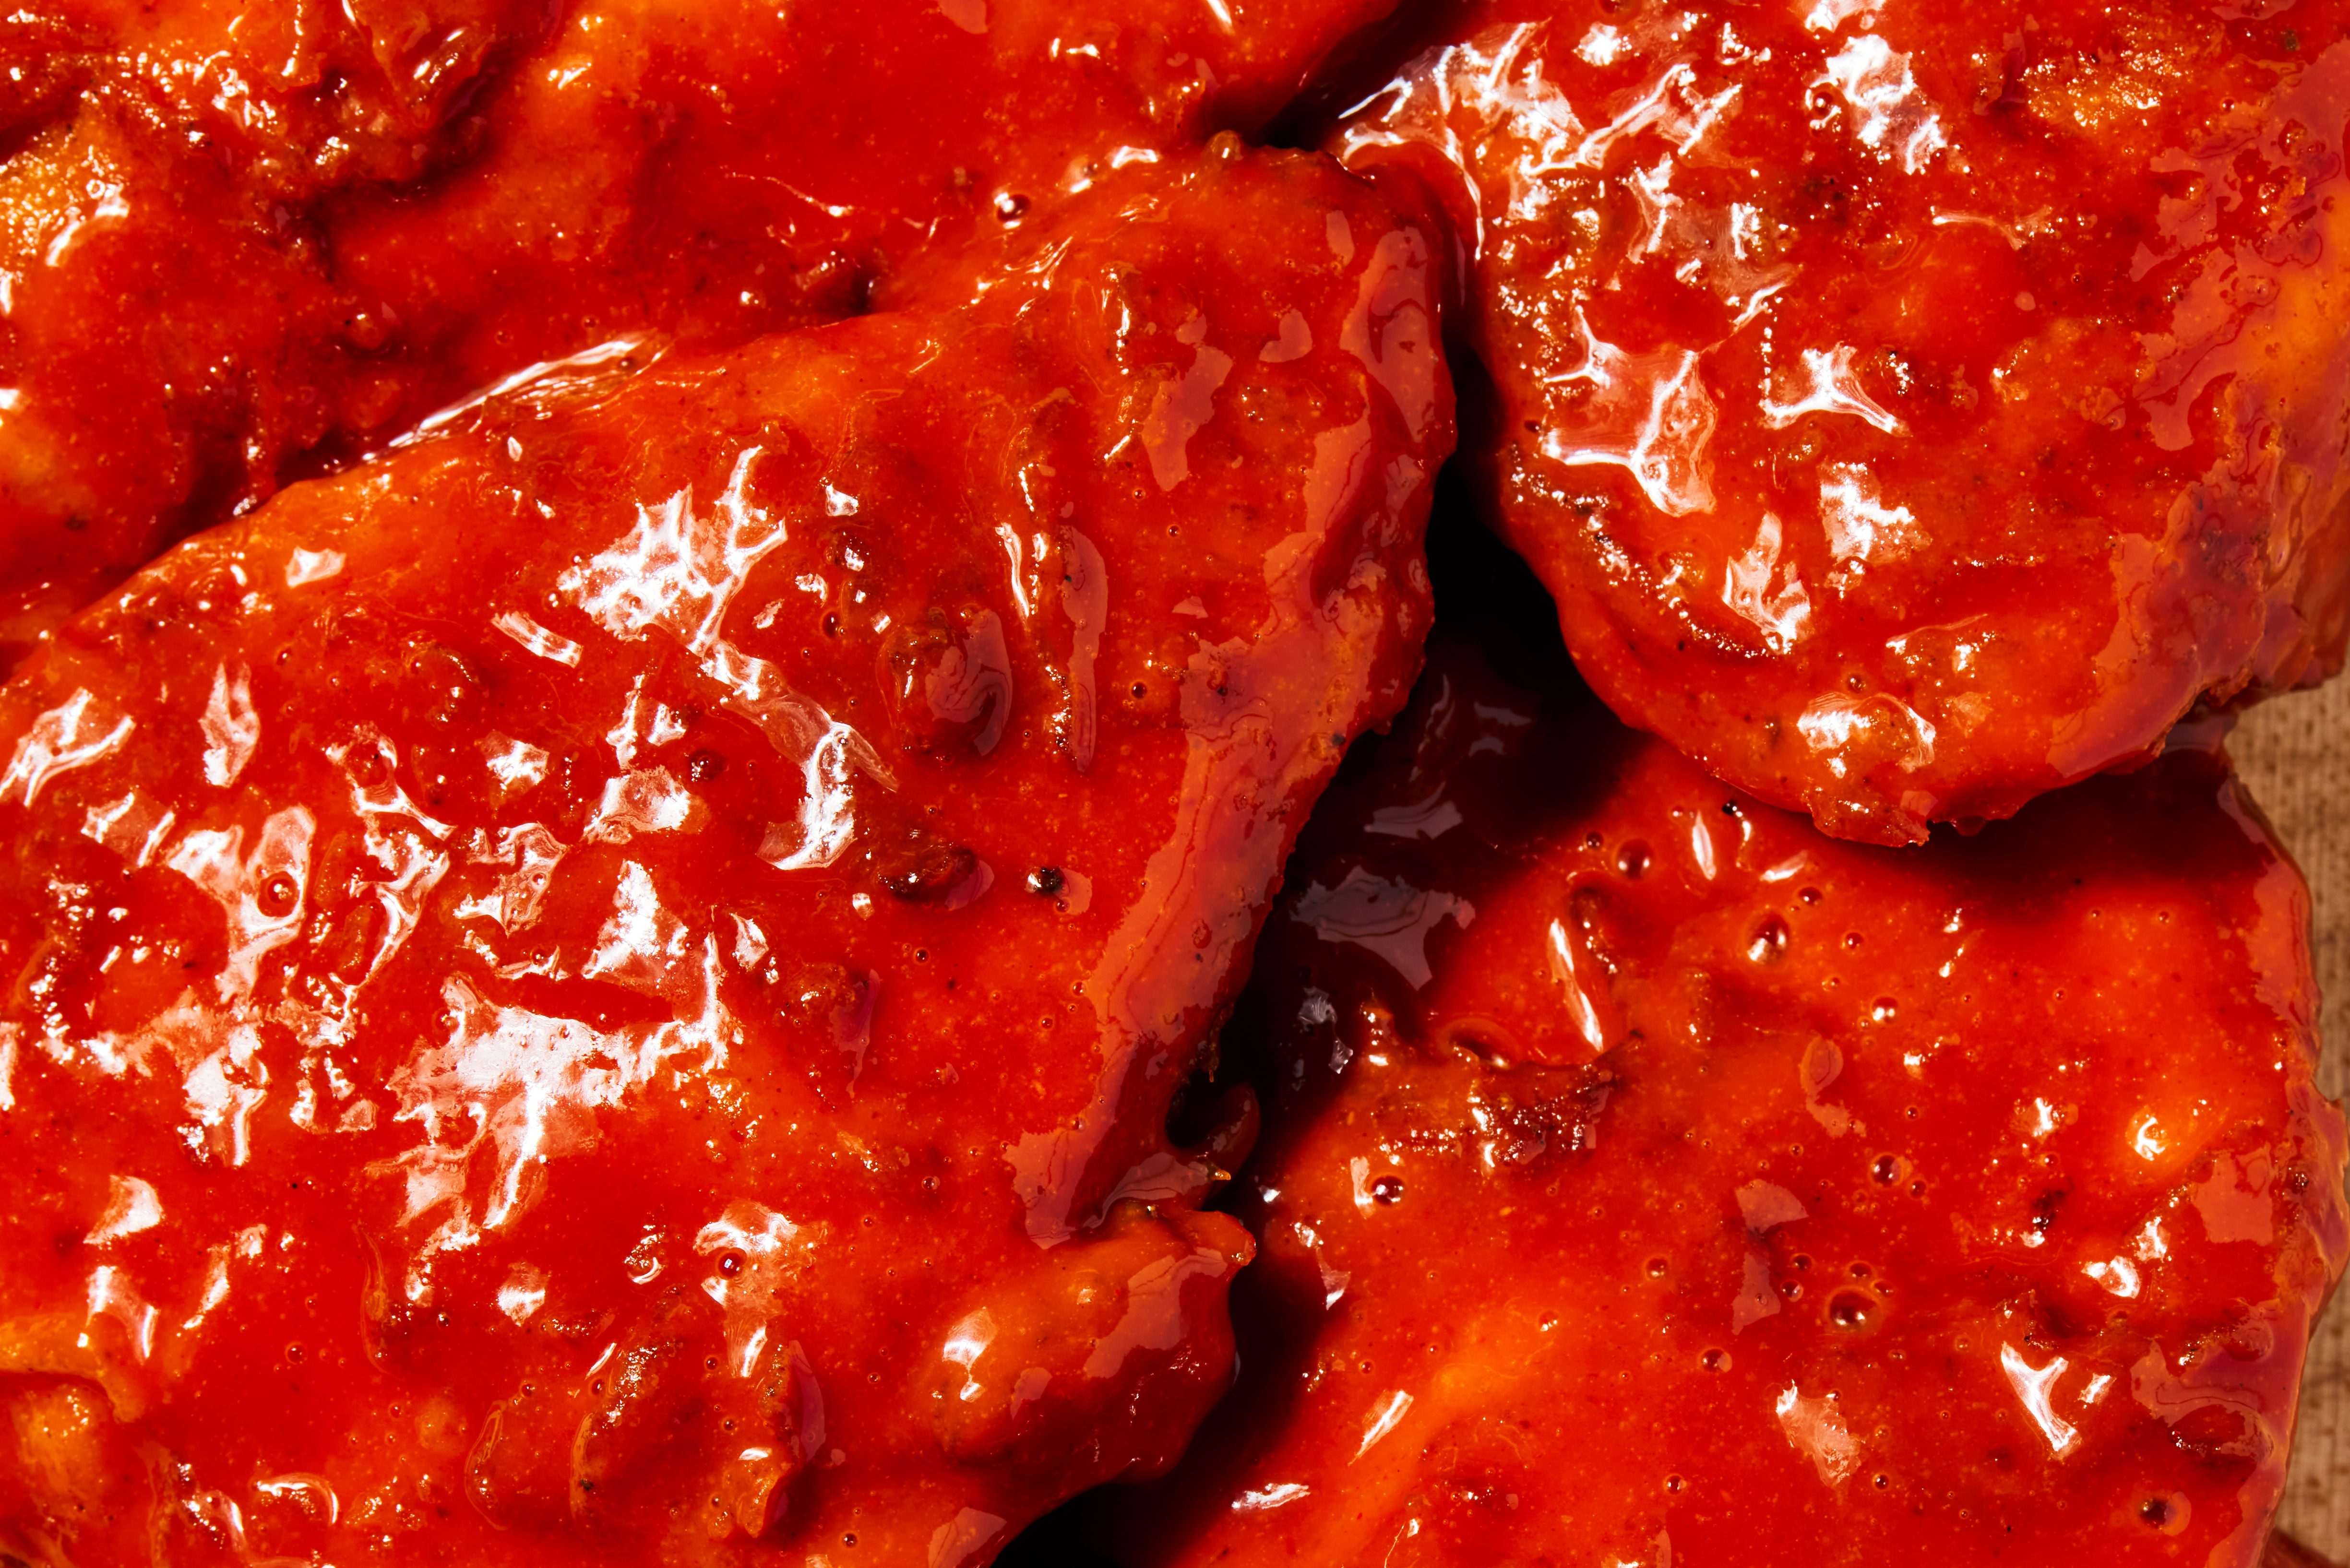 It's the redder the better when it comes to Buffalo sauce